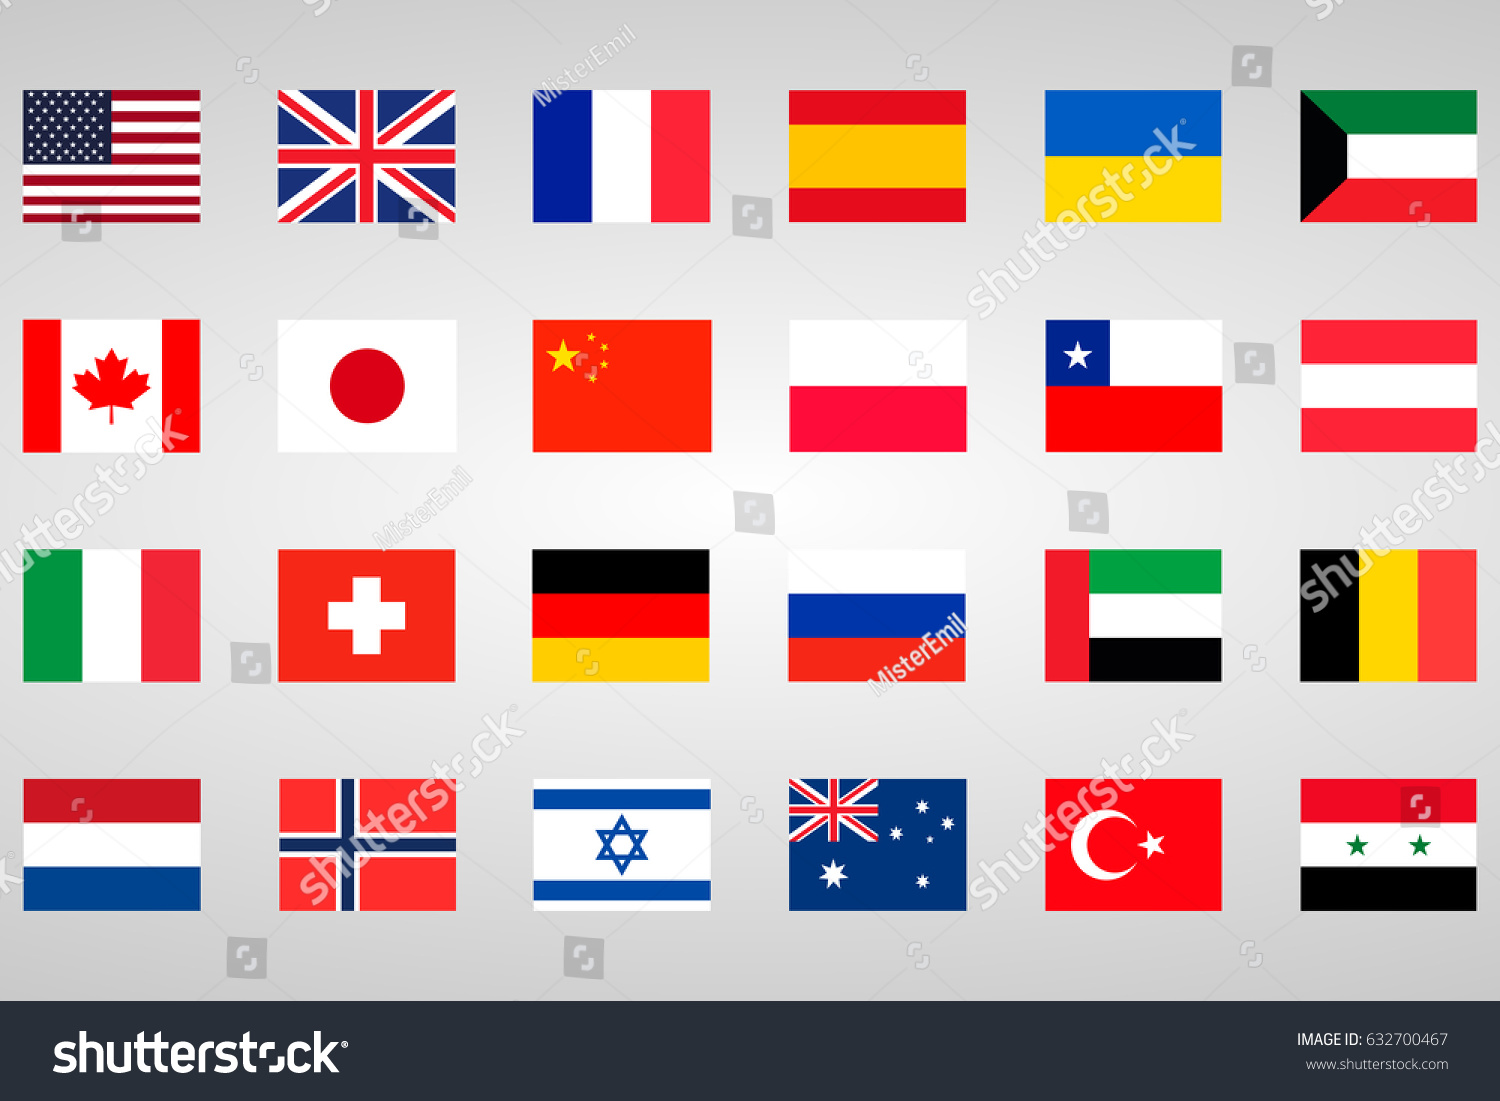 6,214 Usa and spain flag Images, Stock Photos & Vectors | Shutterstock